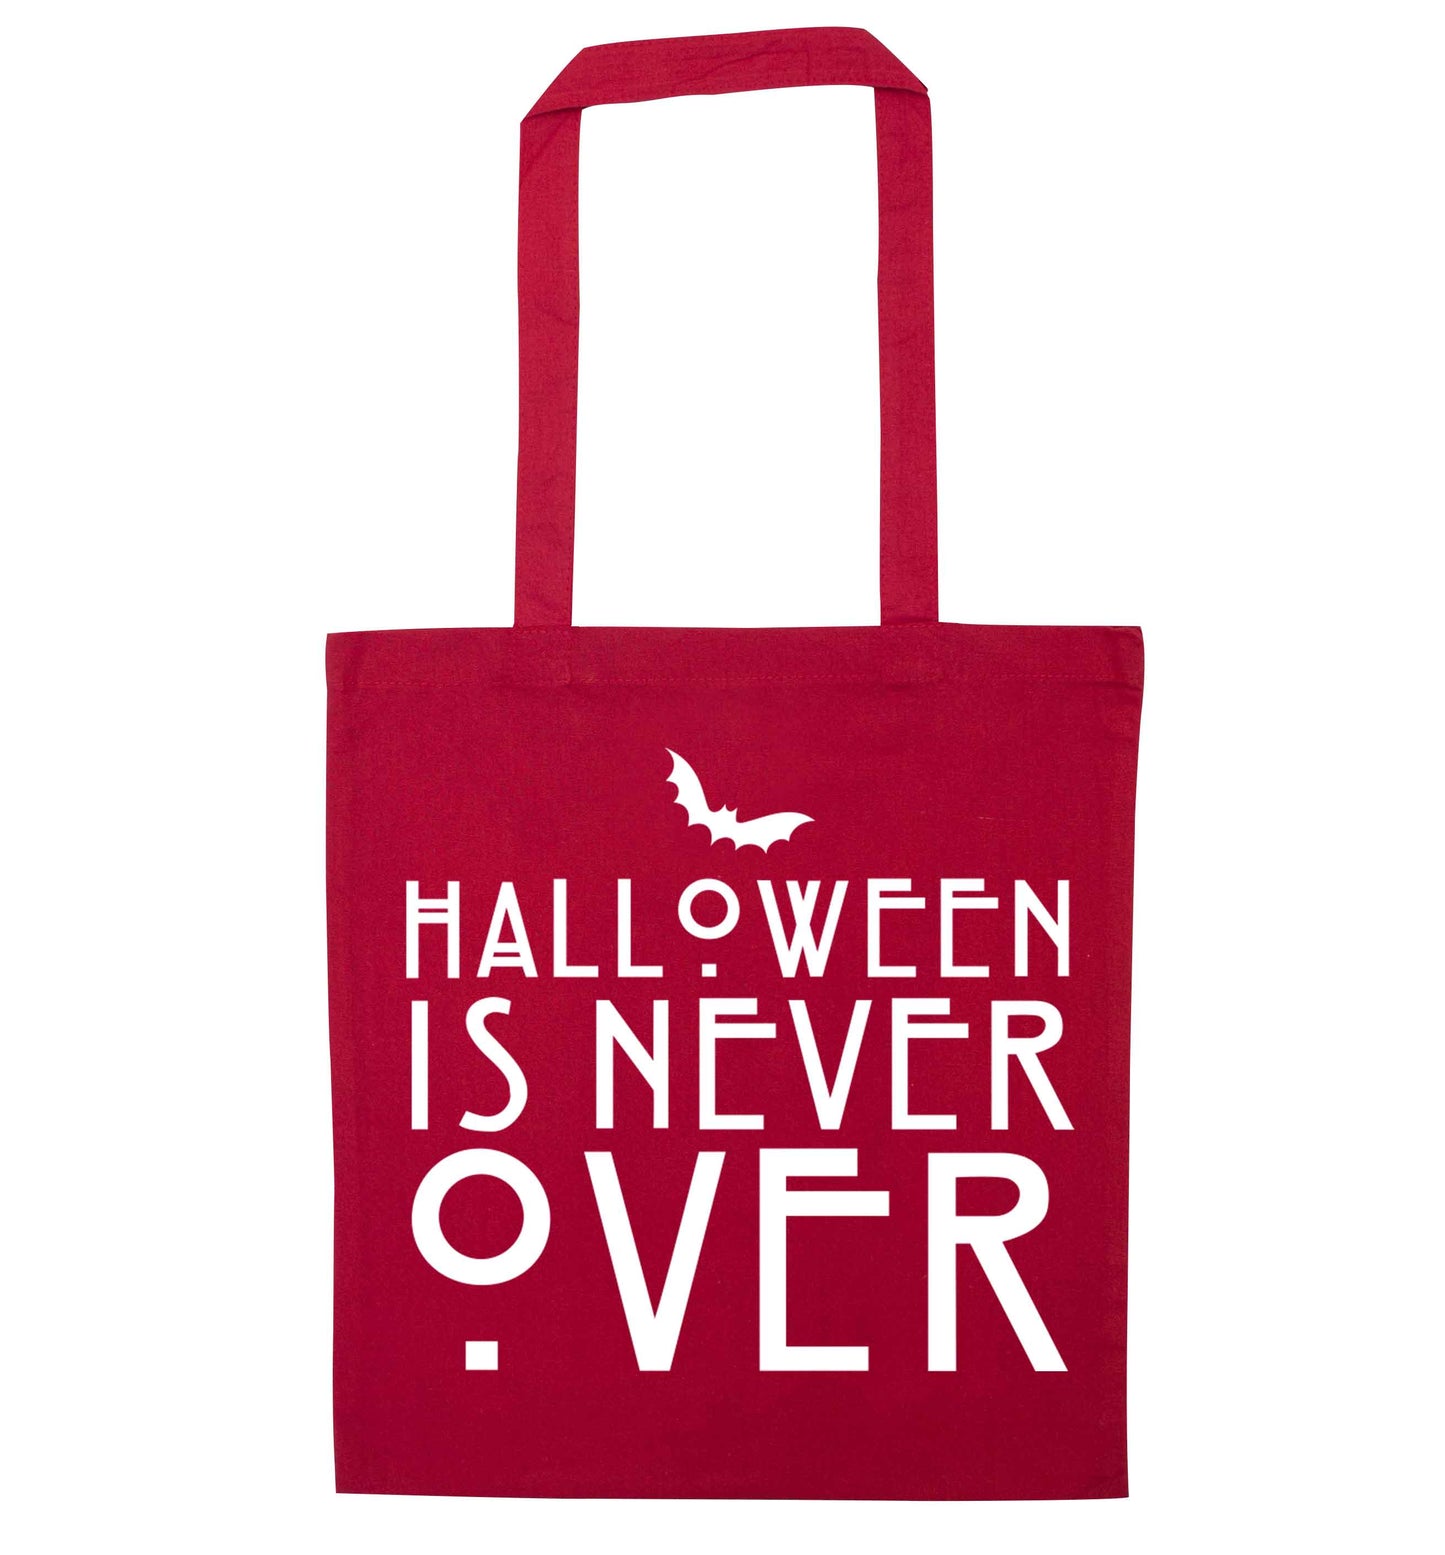 Halloween is never over red tote bag